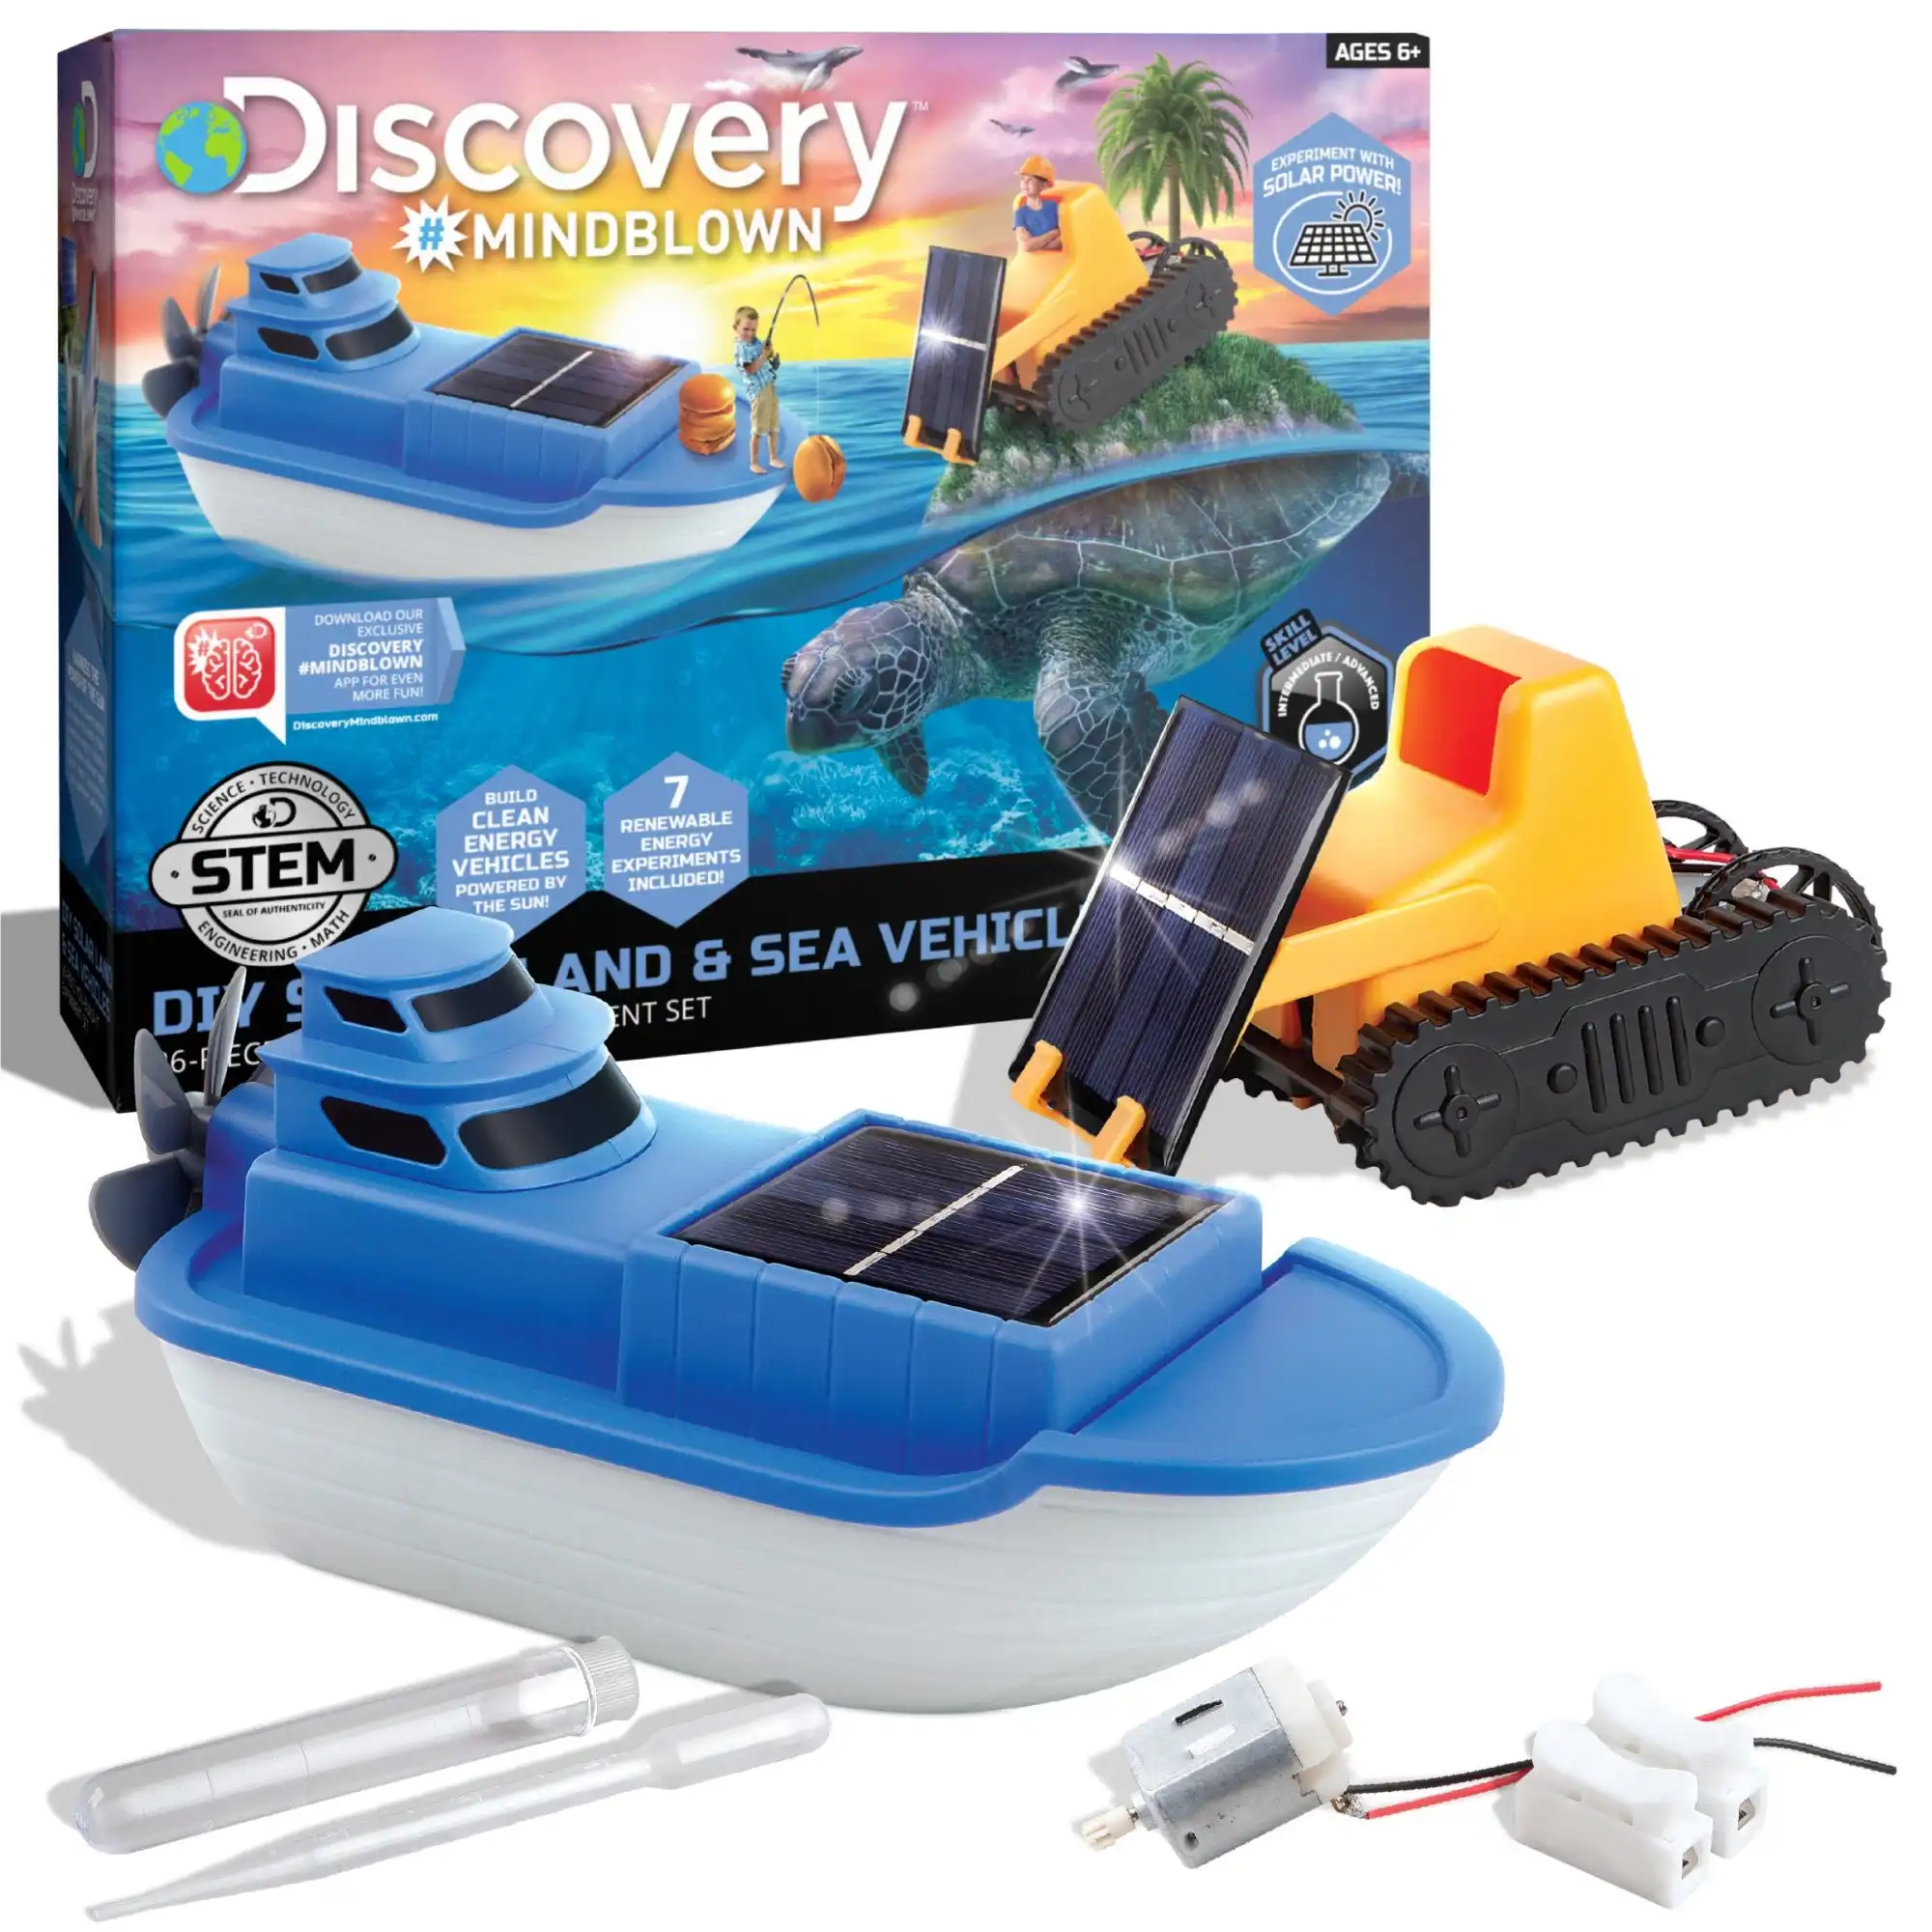 Discovery #Mindblown Kids DIY Solar Land and Sea Rover